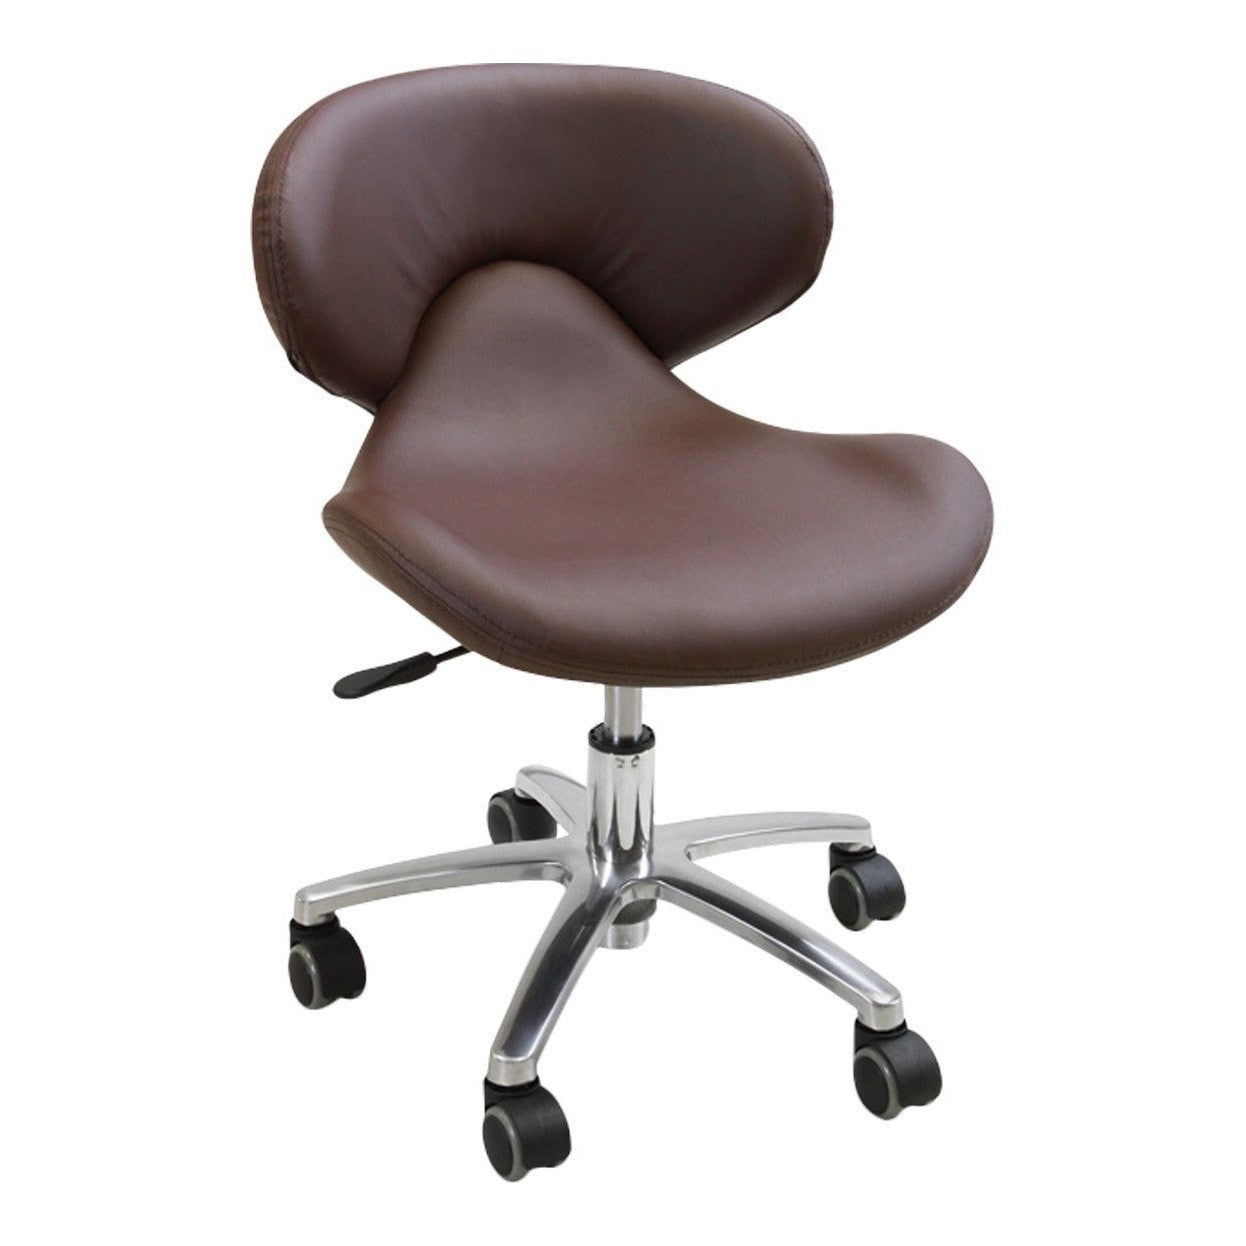 Continuum Continuum Standard Tech Chair Pedicure Stools - ChairsThatGive